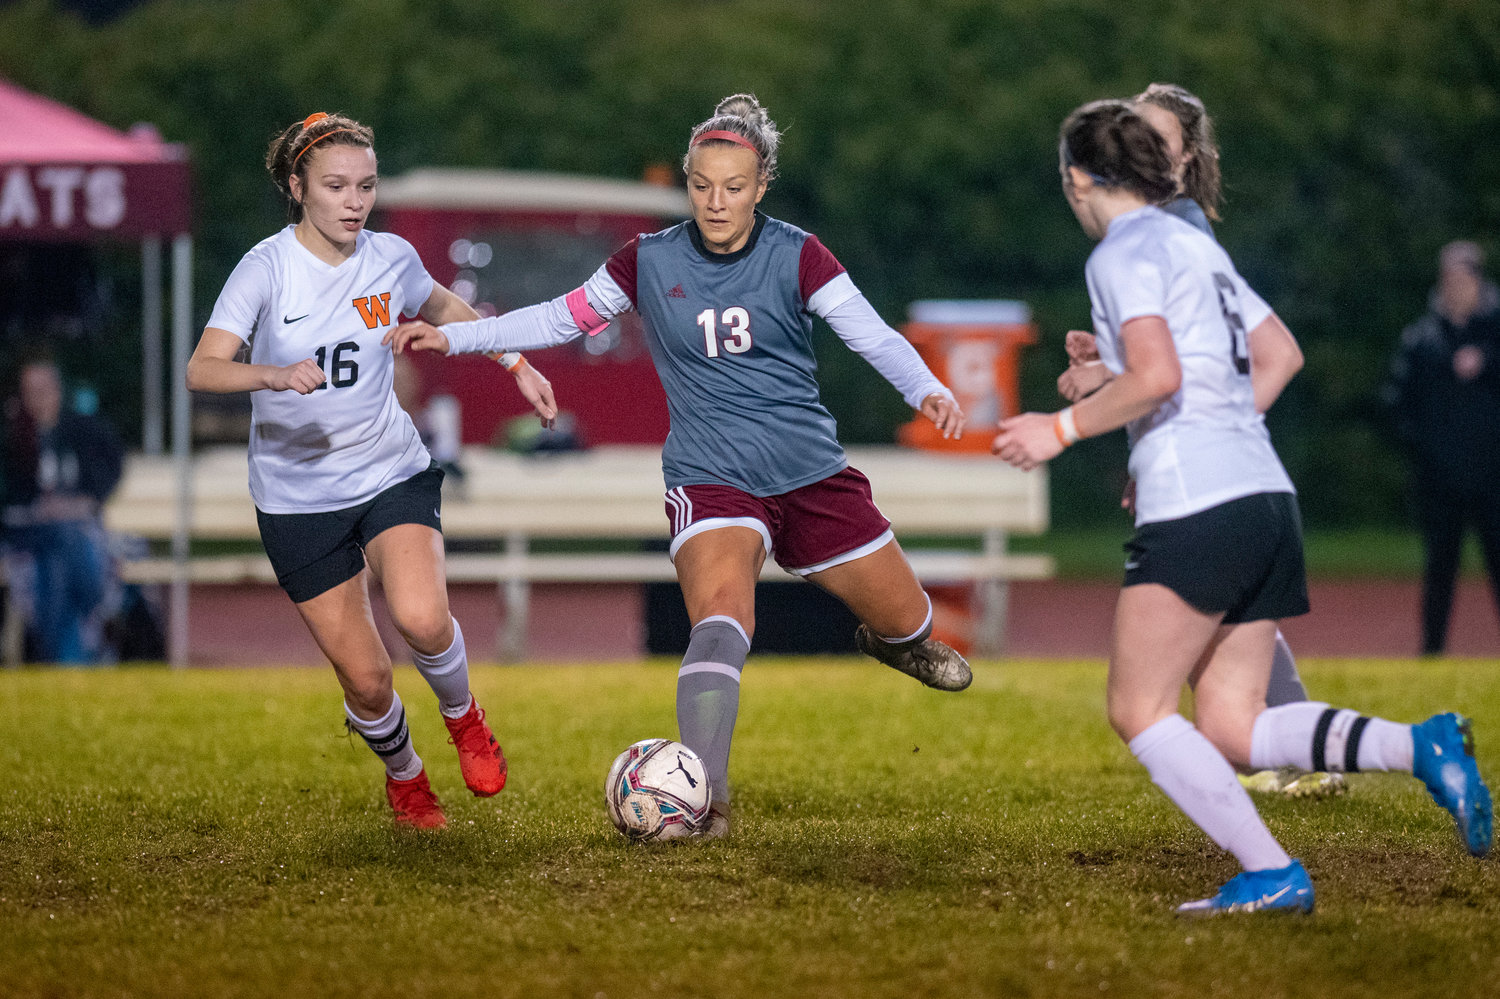 W.F. West's Cam Sheets (13) battles with two Washougal players in a district playoff match Tuesday, Nov. 2.